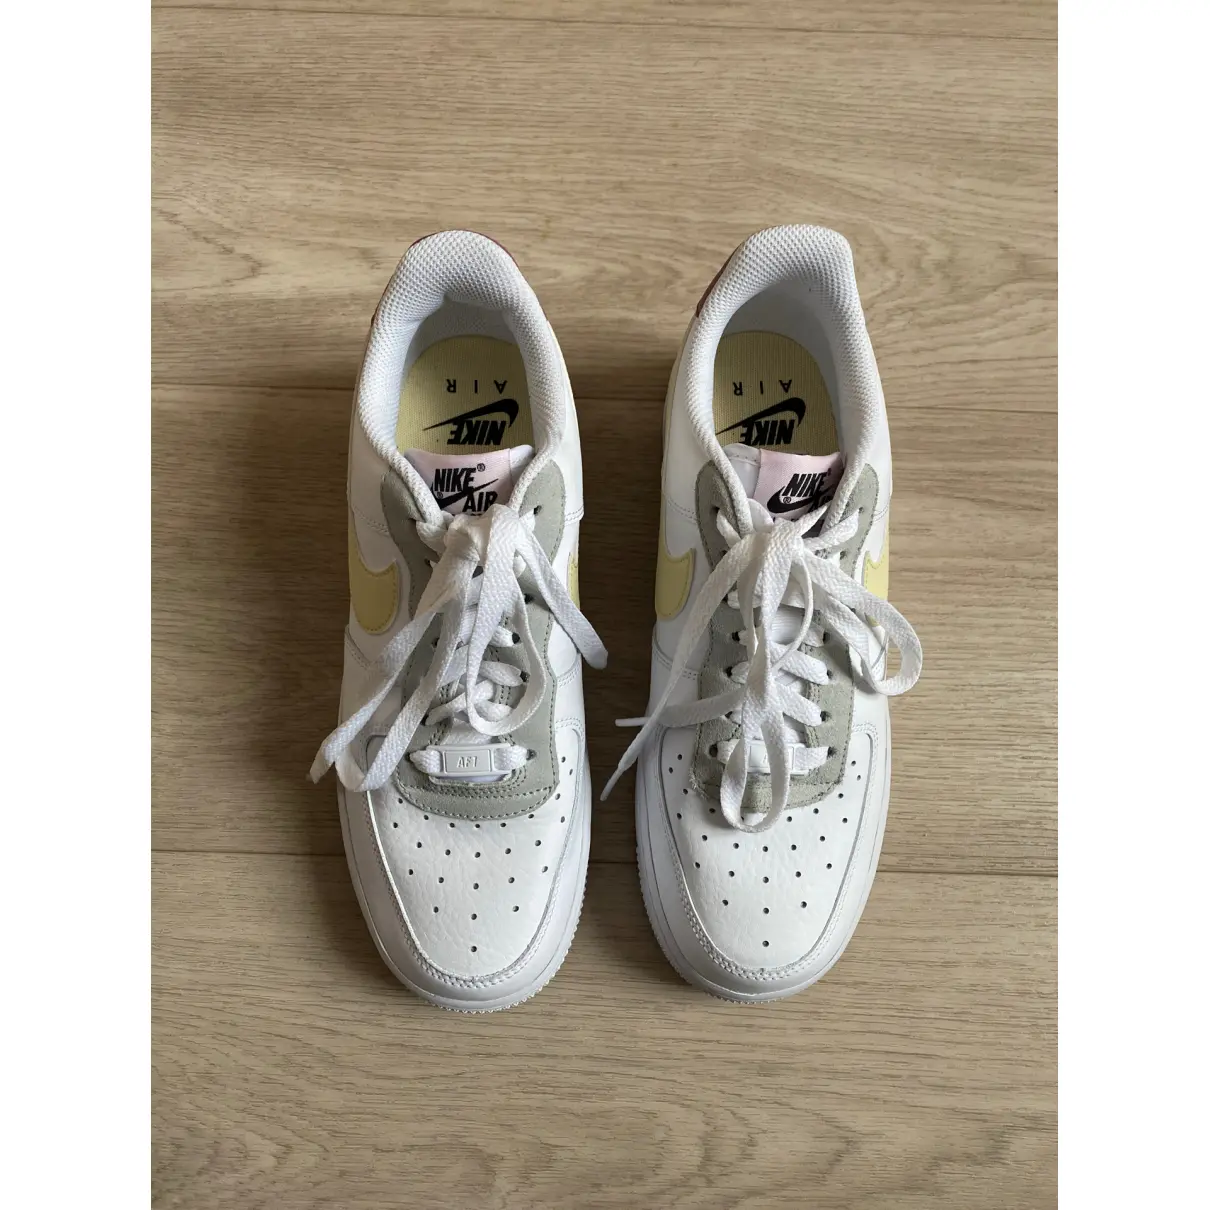 Buy Nike Air Force 1 leather trainers online